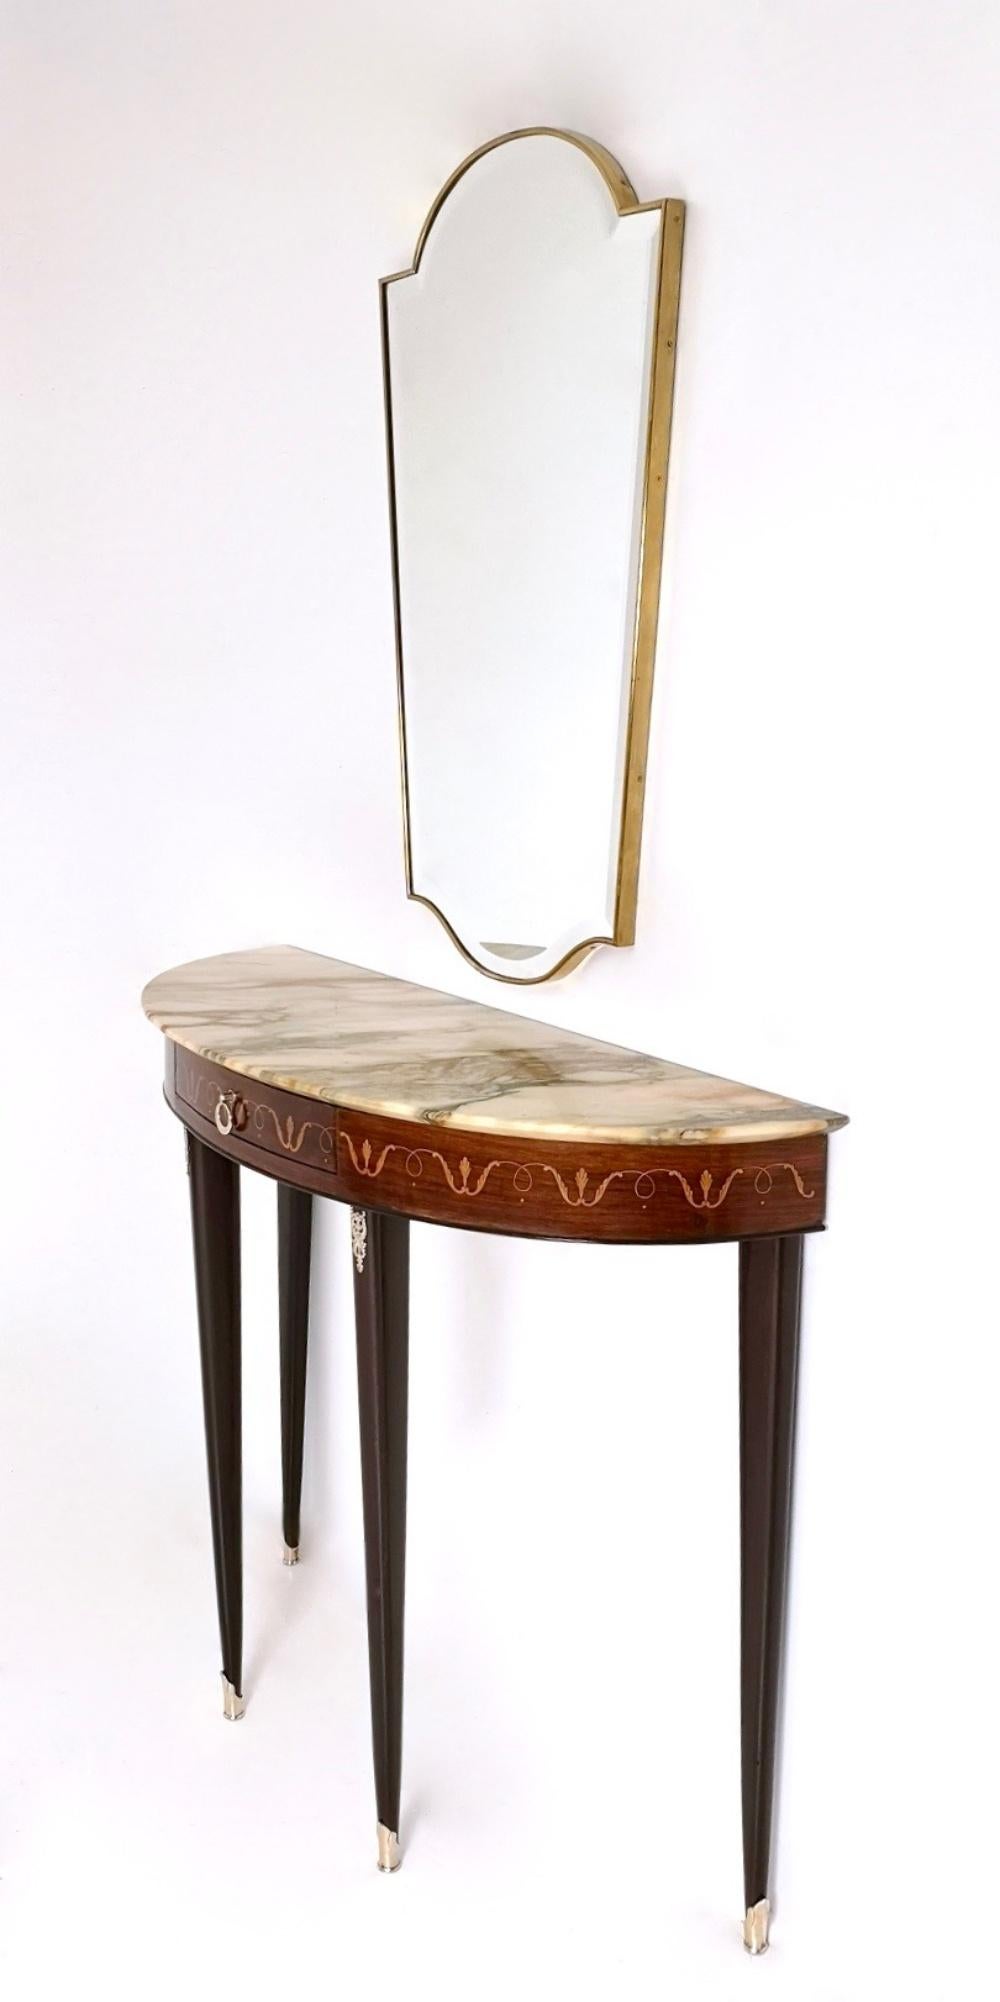 Italian Midcentury Wooden Console Table with a Demilune Marble Top, Italy, 1950s